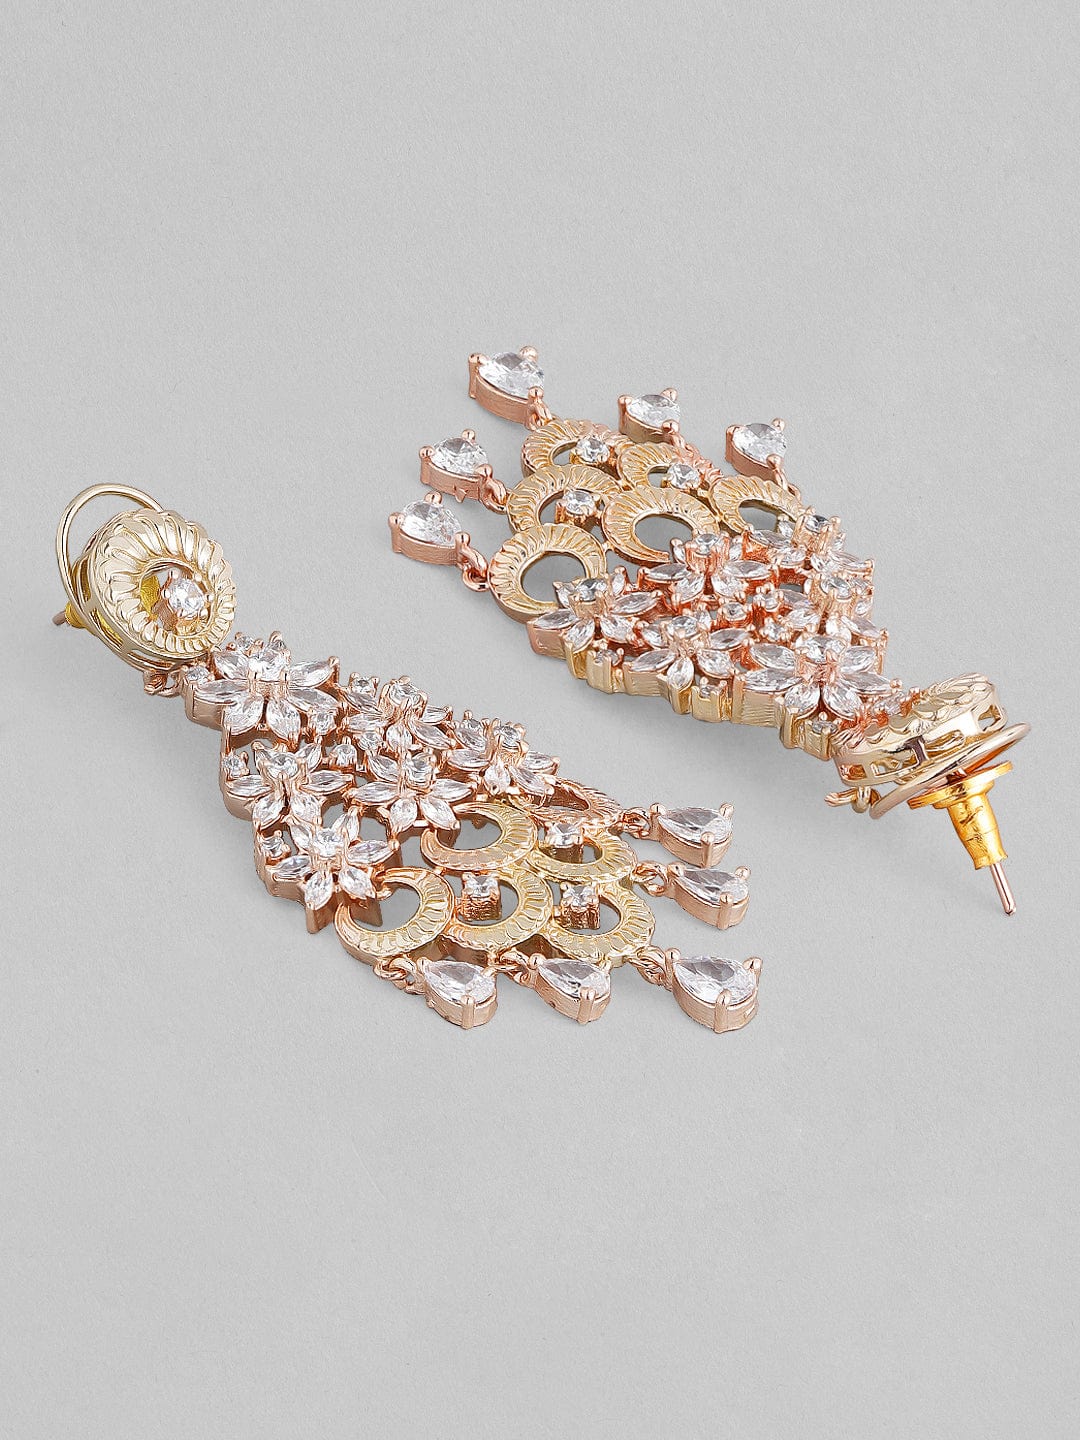 Rubans Zircon Studded Handcrafted Rose Gold Plated Floral Drop Earrings Earrings